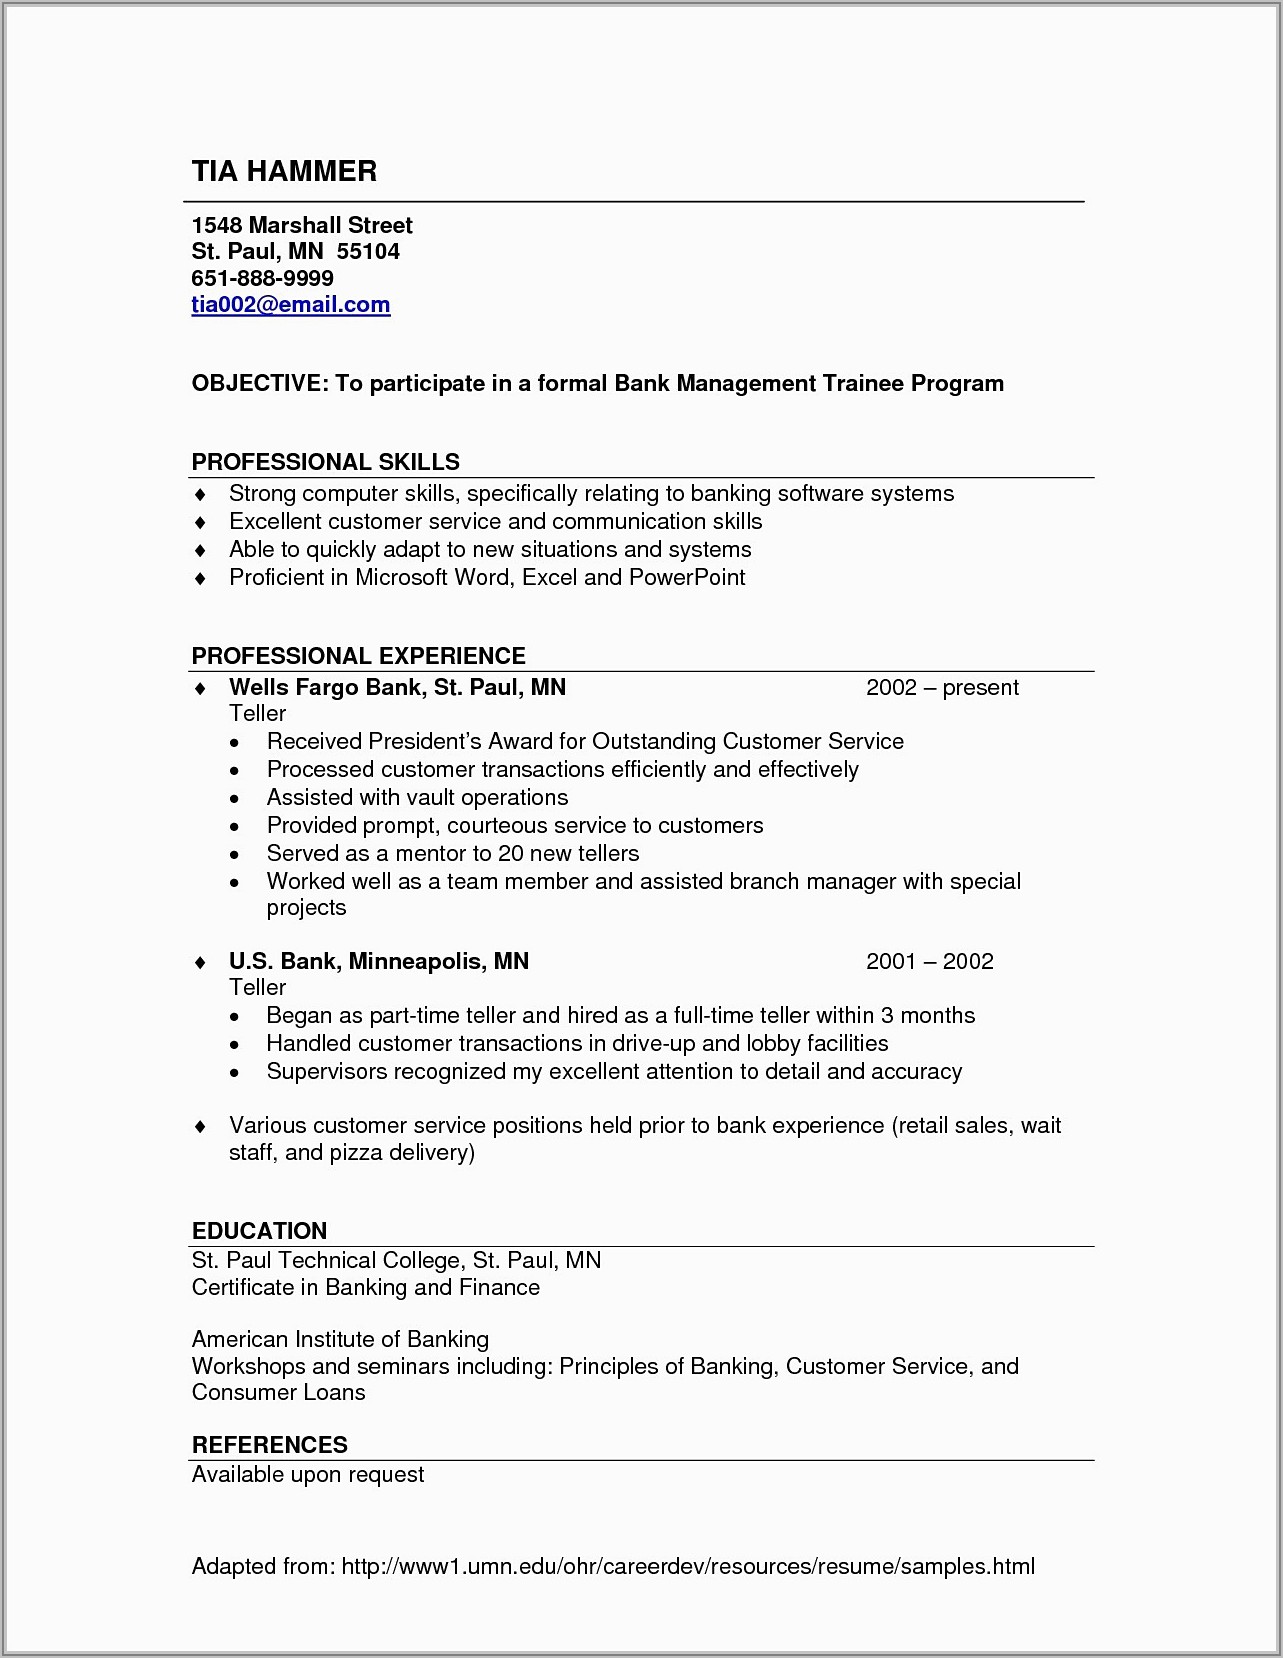 Where To Get Your Resume Professionally Done